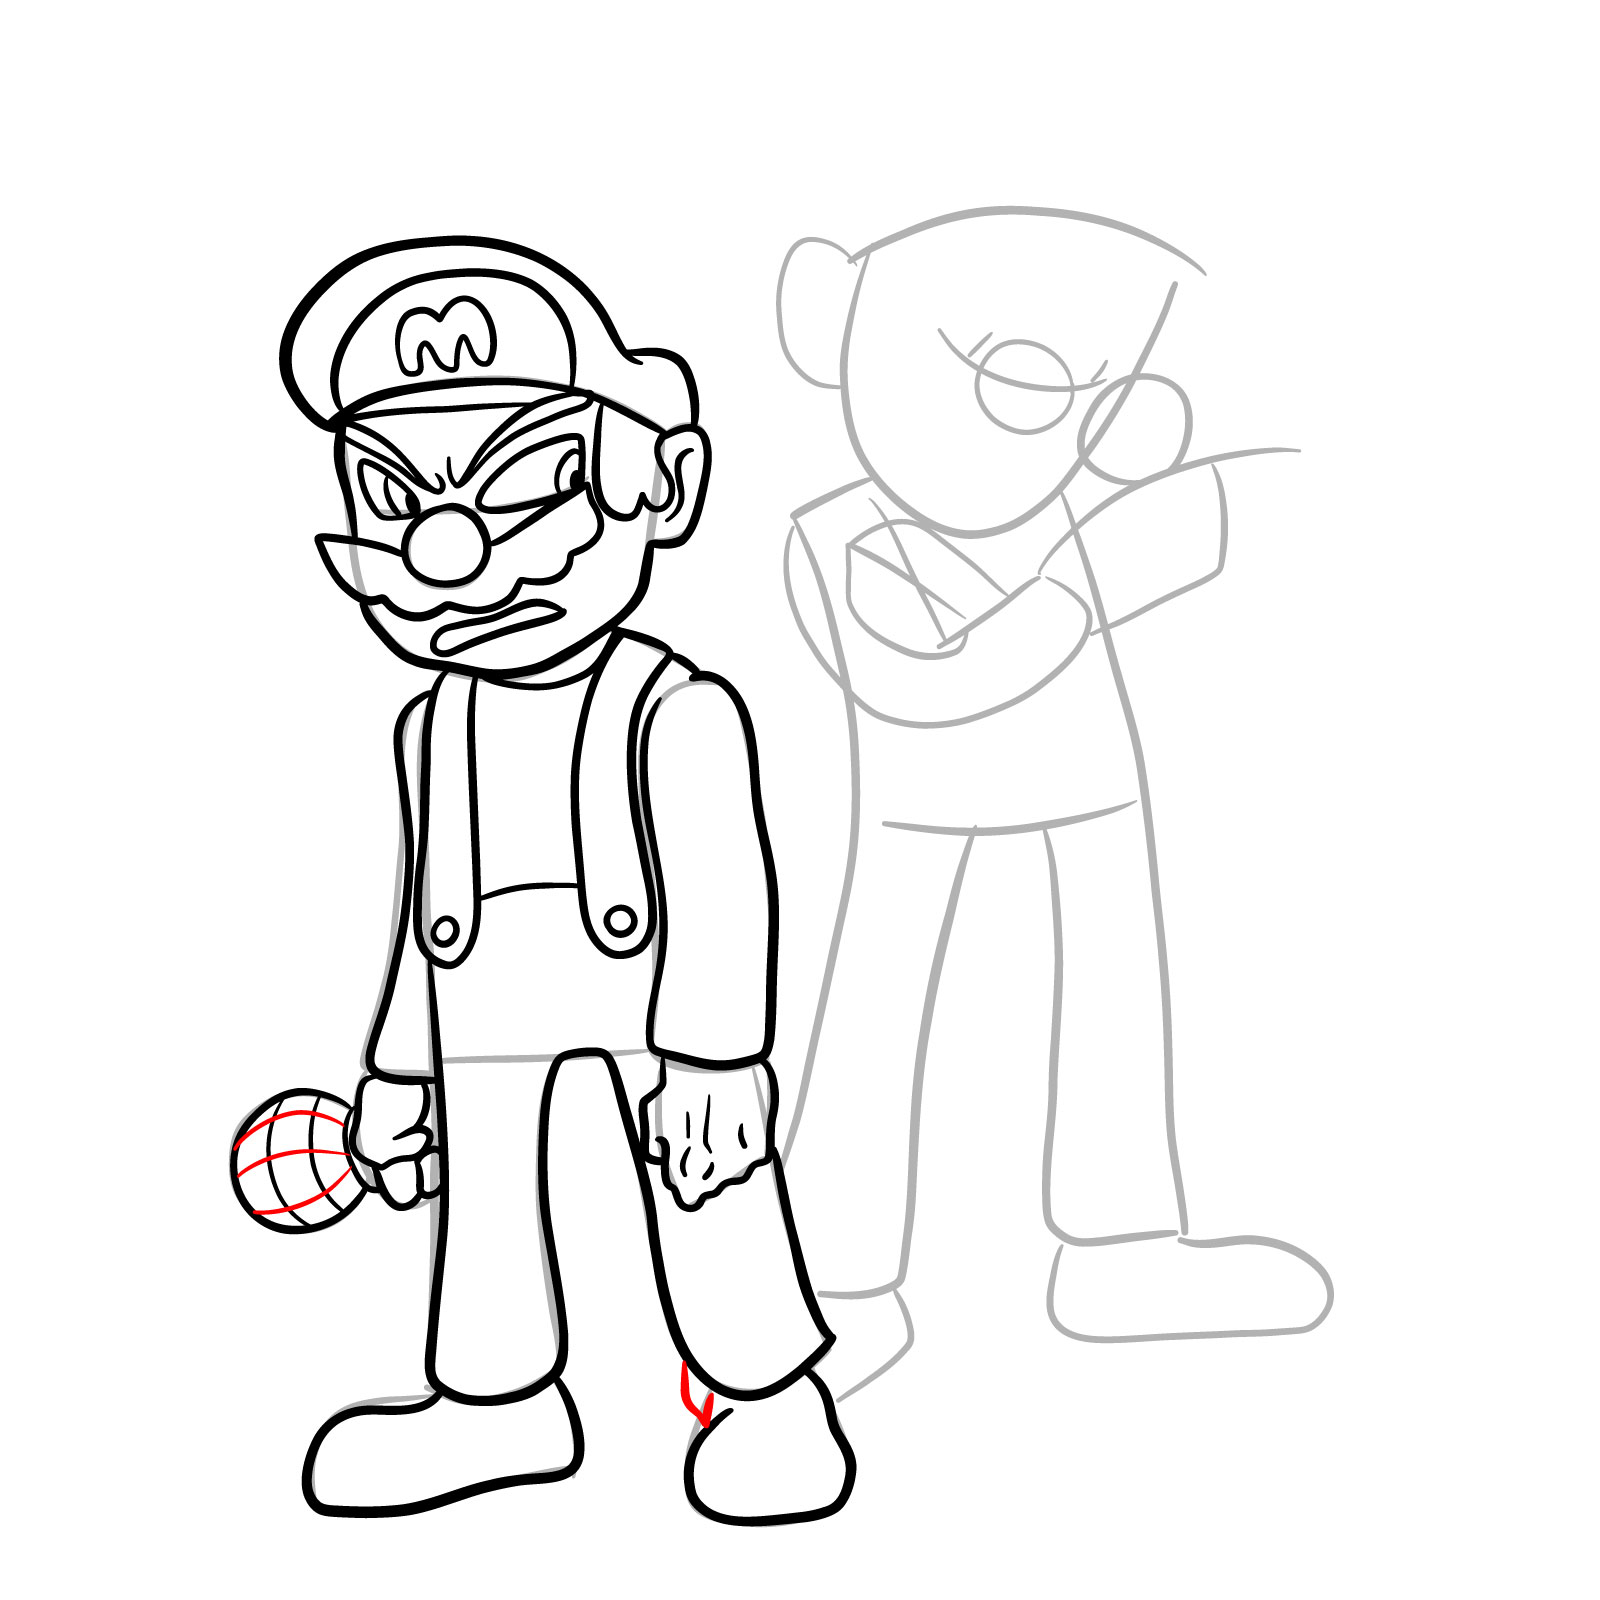 How to draw Mario and Luigi from Tails Gets Trolled - step 22